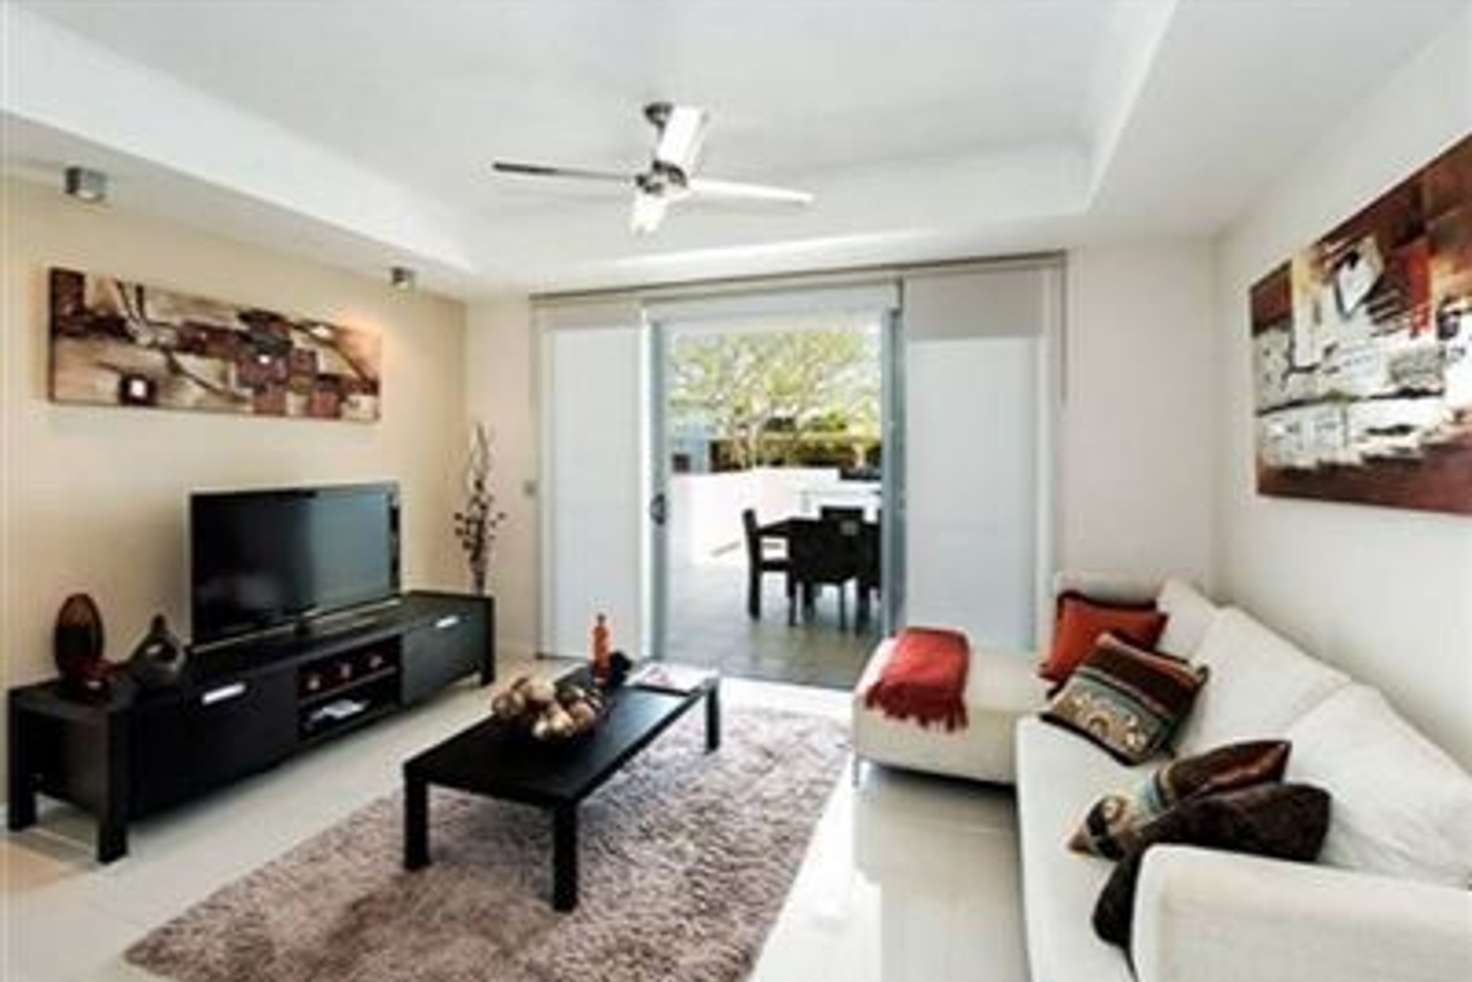 Main view of Homely apartment listing, 6/18 Barramul Street, Bulimba QLD 4171